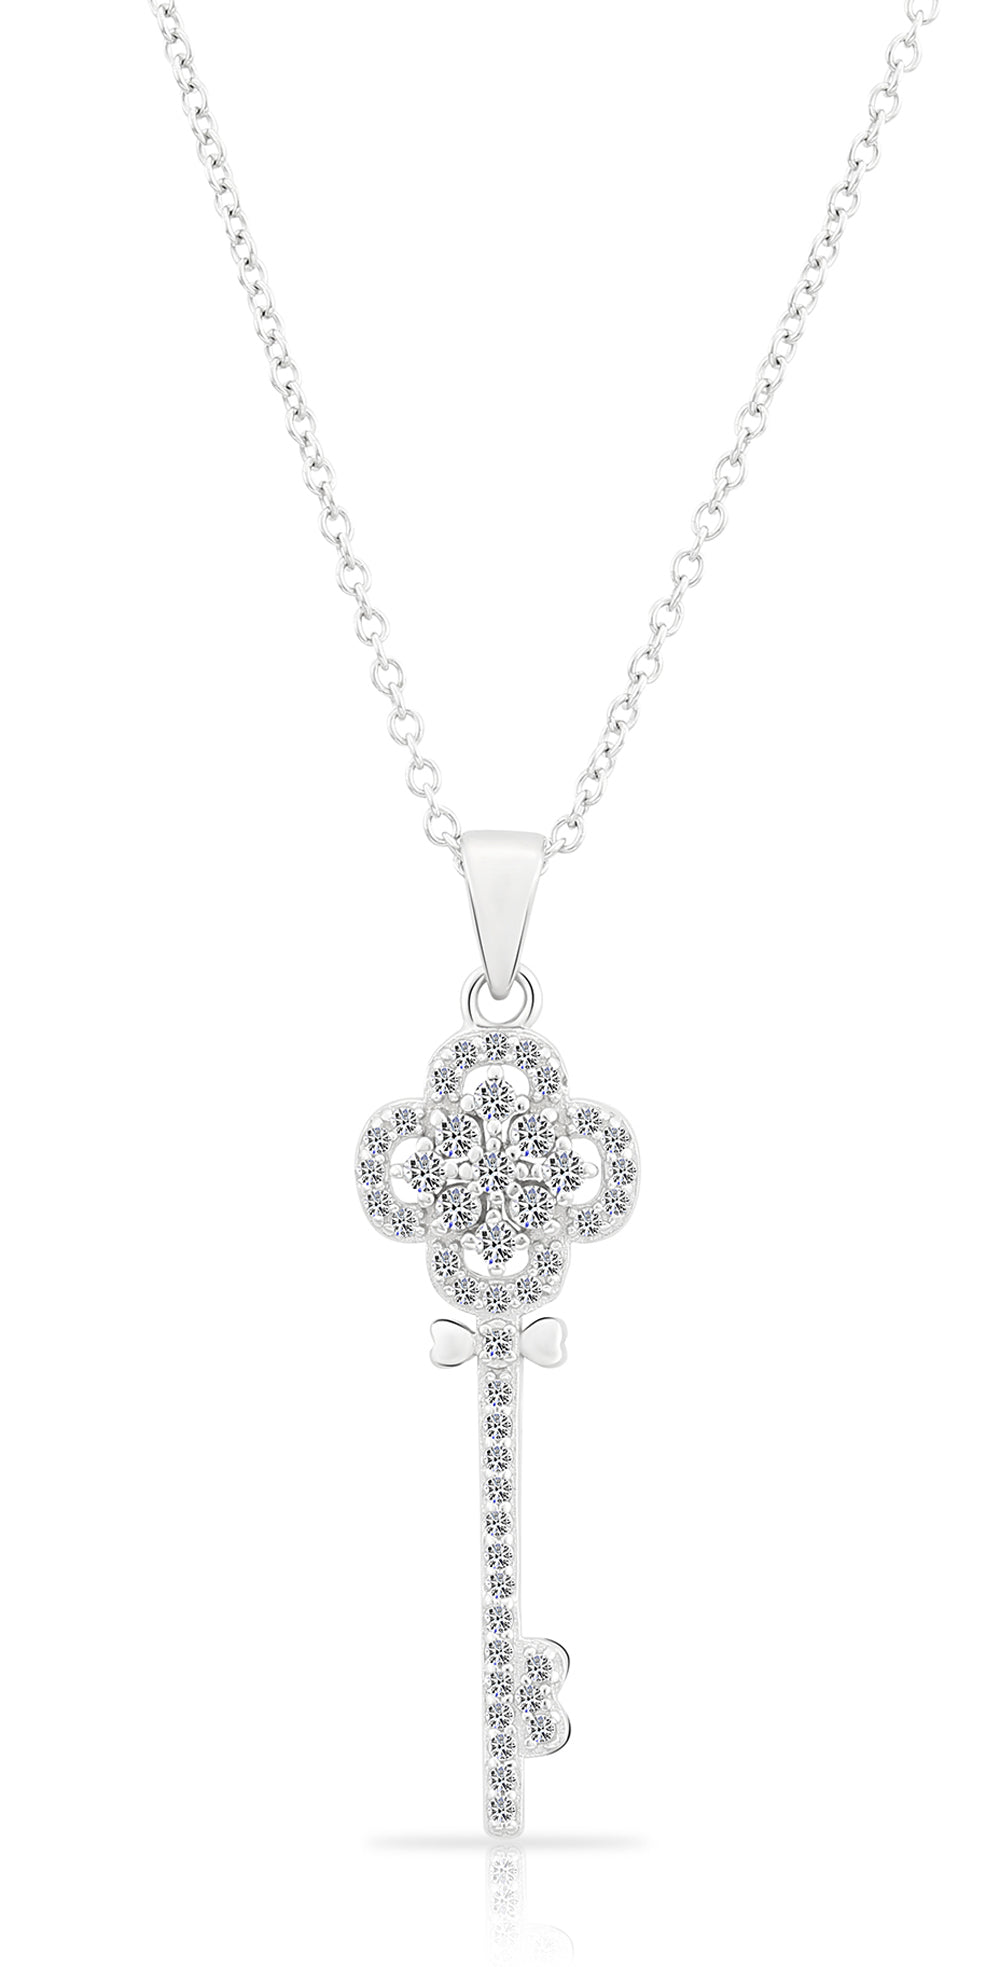 CZ Key Charm Necklace in Sterling Silver